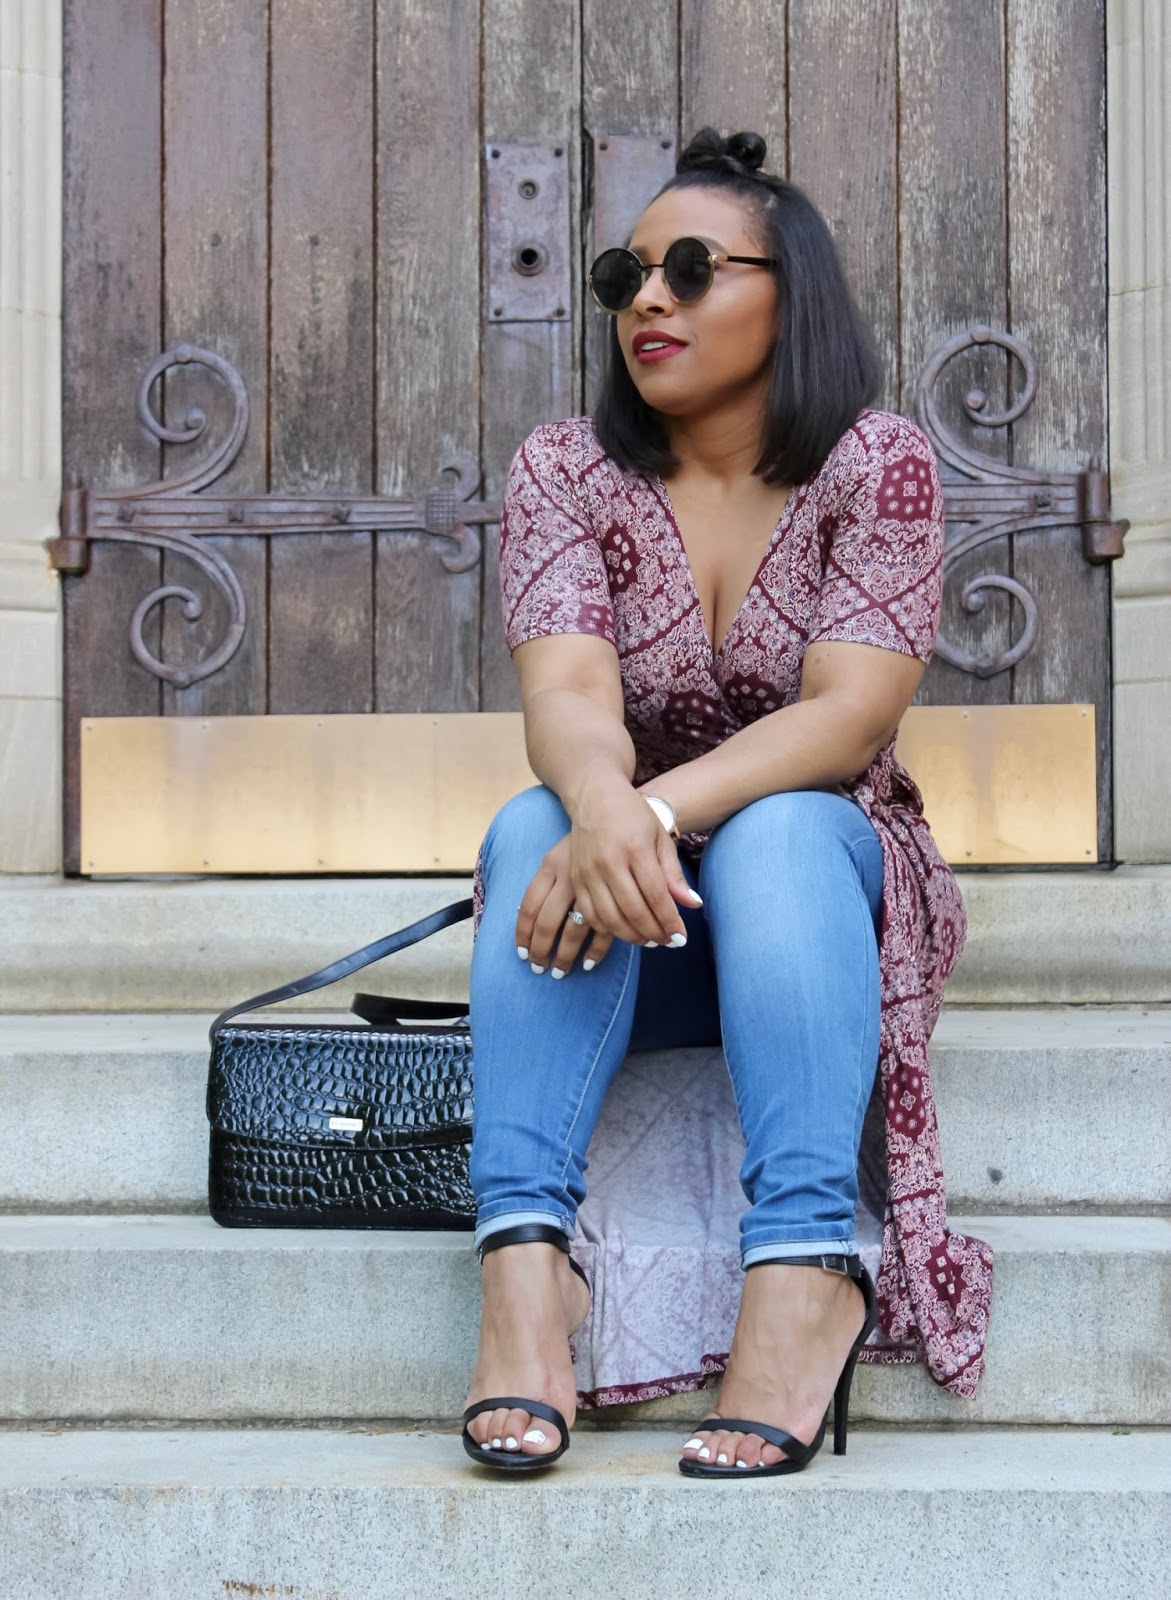 How To Find Your Personal Style On A Budget, wrap dress, forever21 wrap dress, printed wrap dress, top knot, jeans with a wrap dress, lifestyle blogger, how to shop, bargain shopper